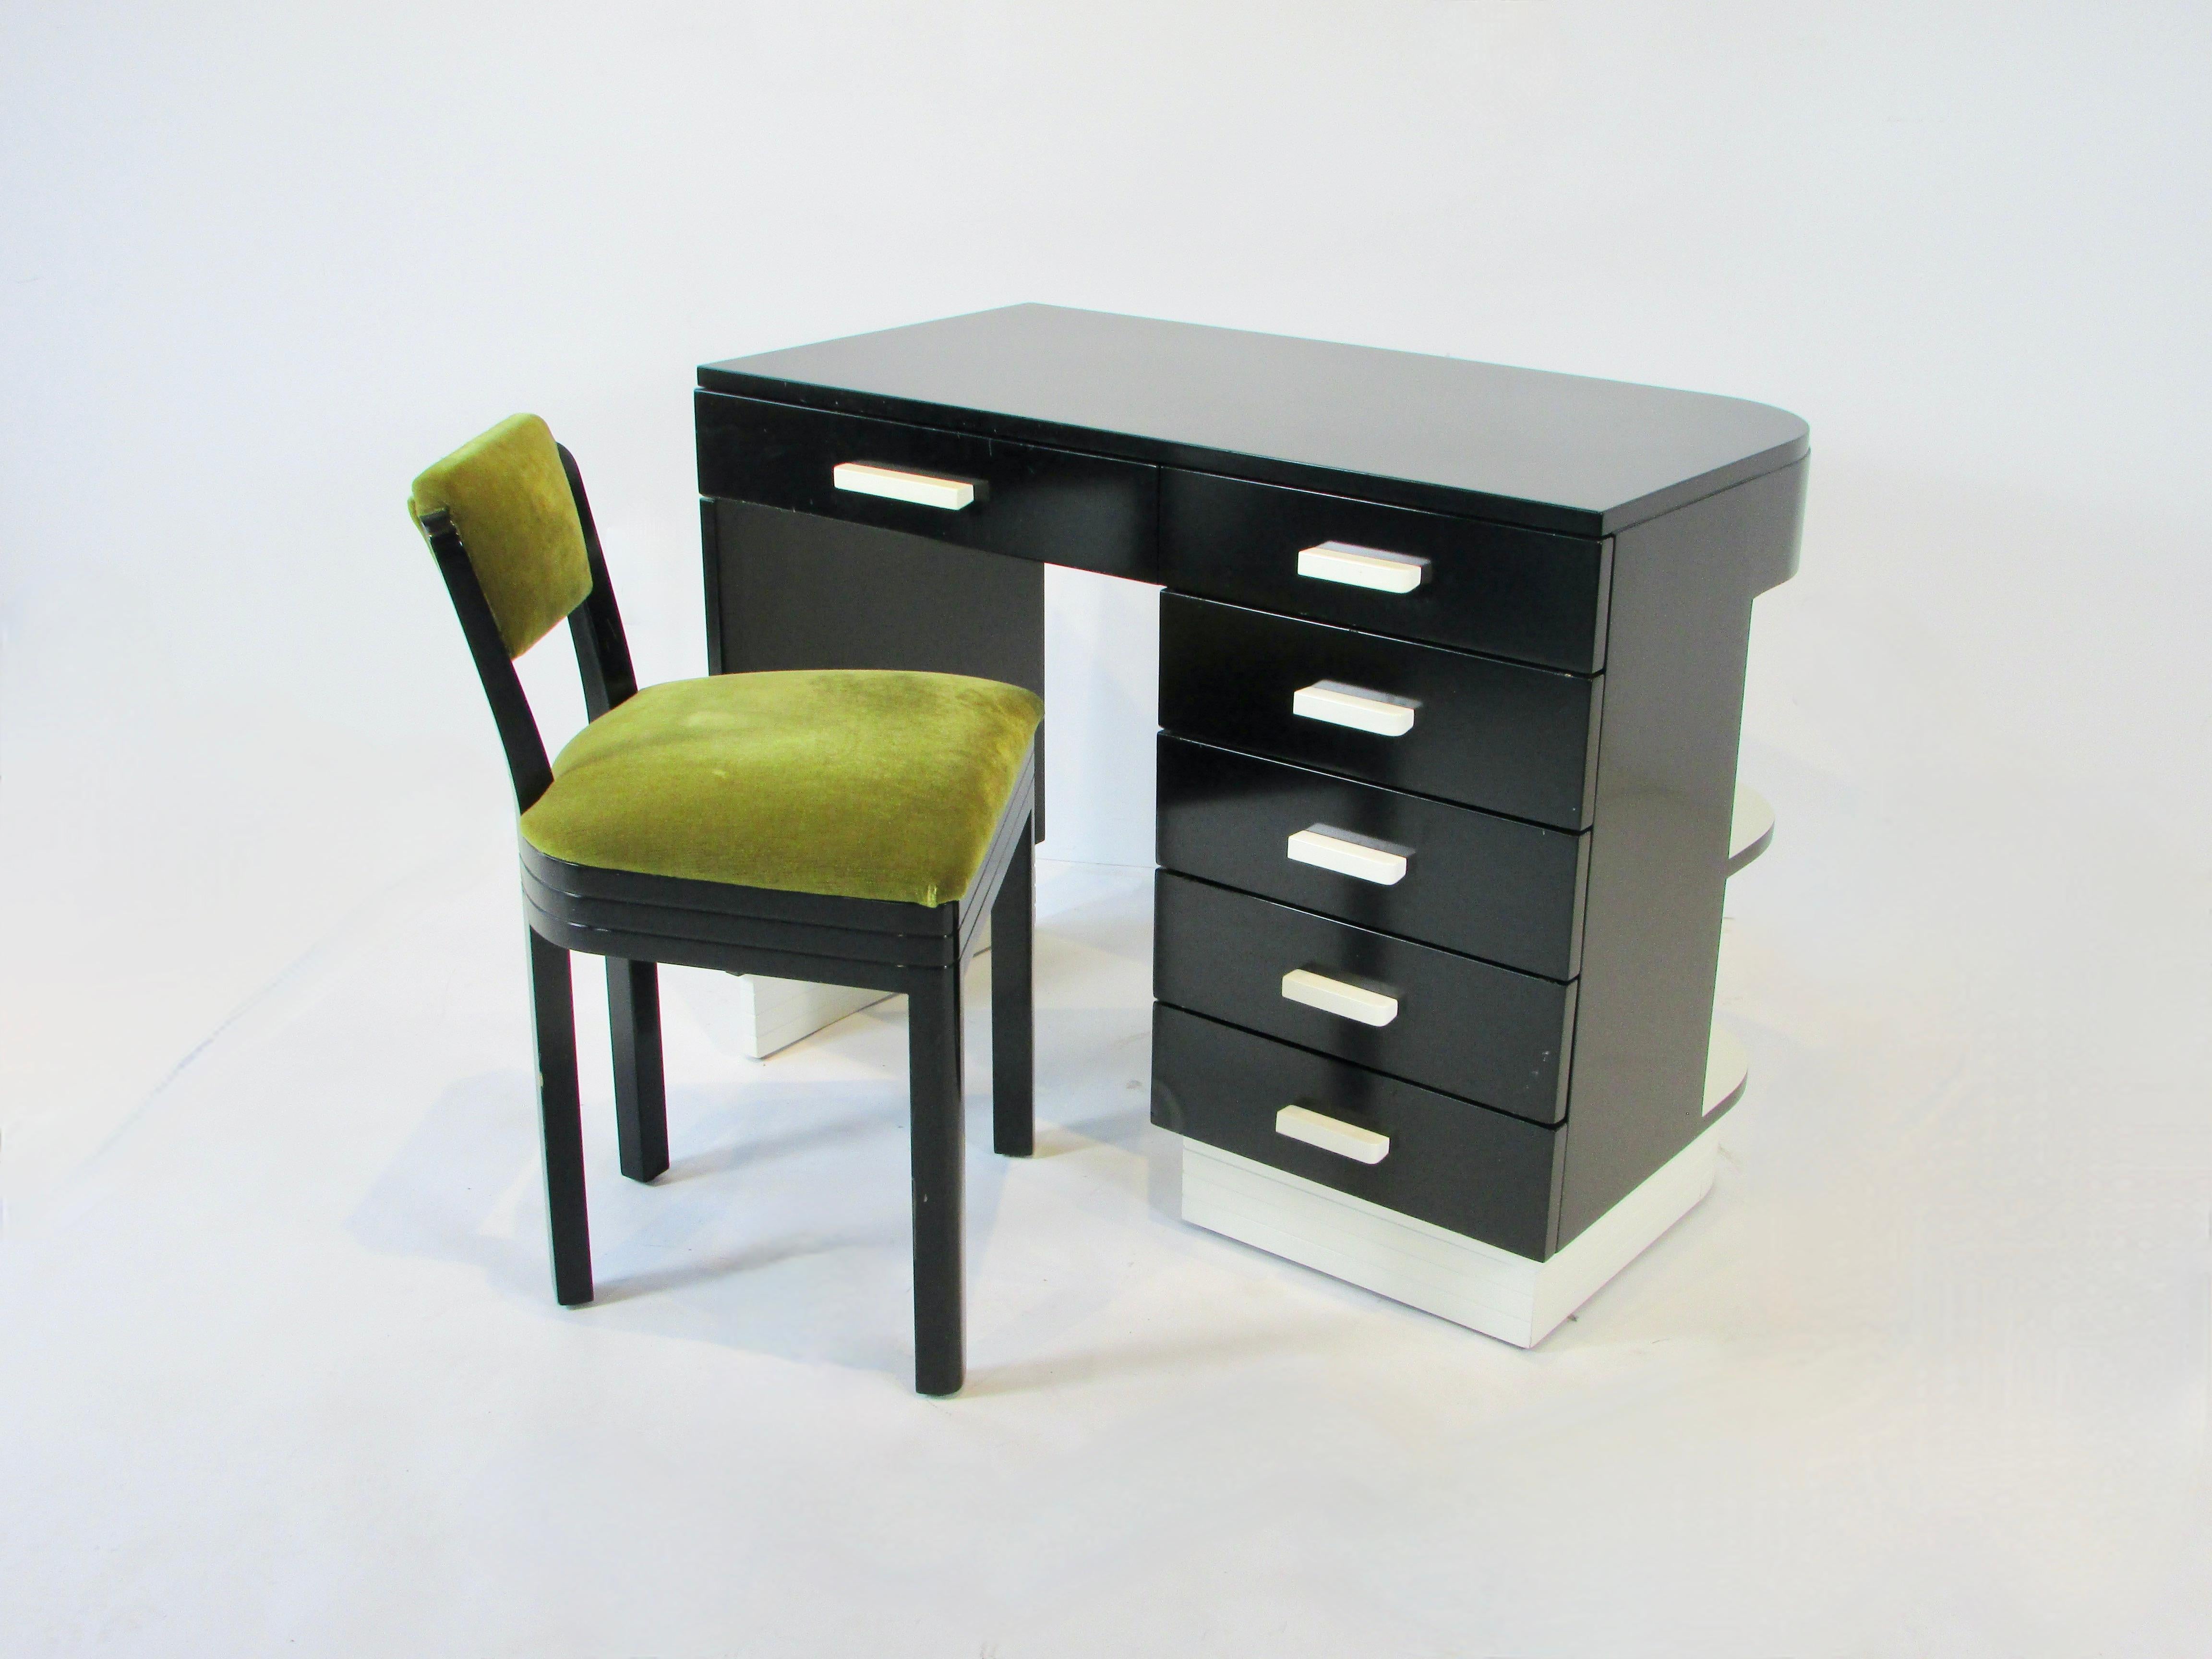 Manufactured by obscure Rorimer Brooks co. of Cleveland Ohio . Art Deco or Moderne Writing desk in matte black lacquer with cream accents . Bank of five drawers to users right side additional pencil drawer over kneehole . Attractive from any angle